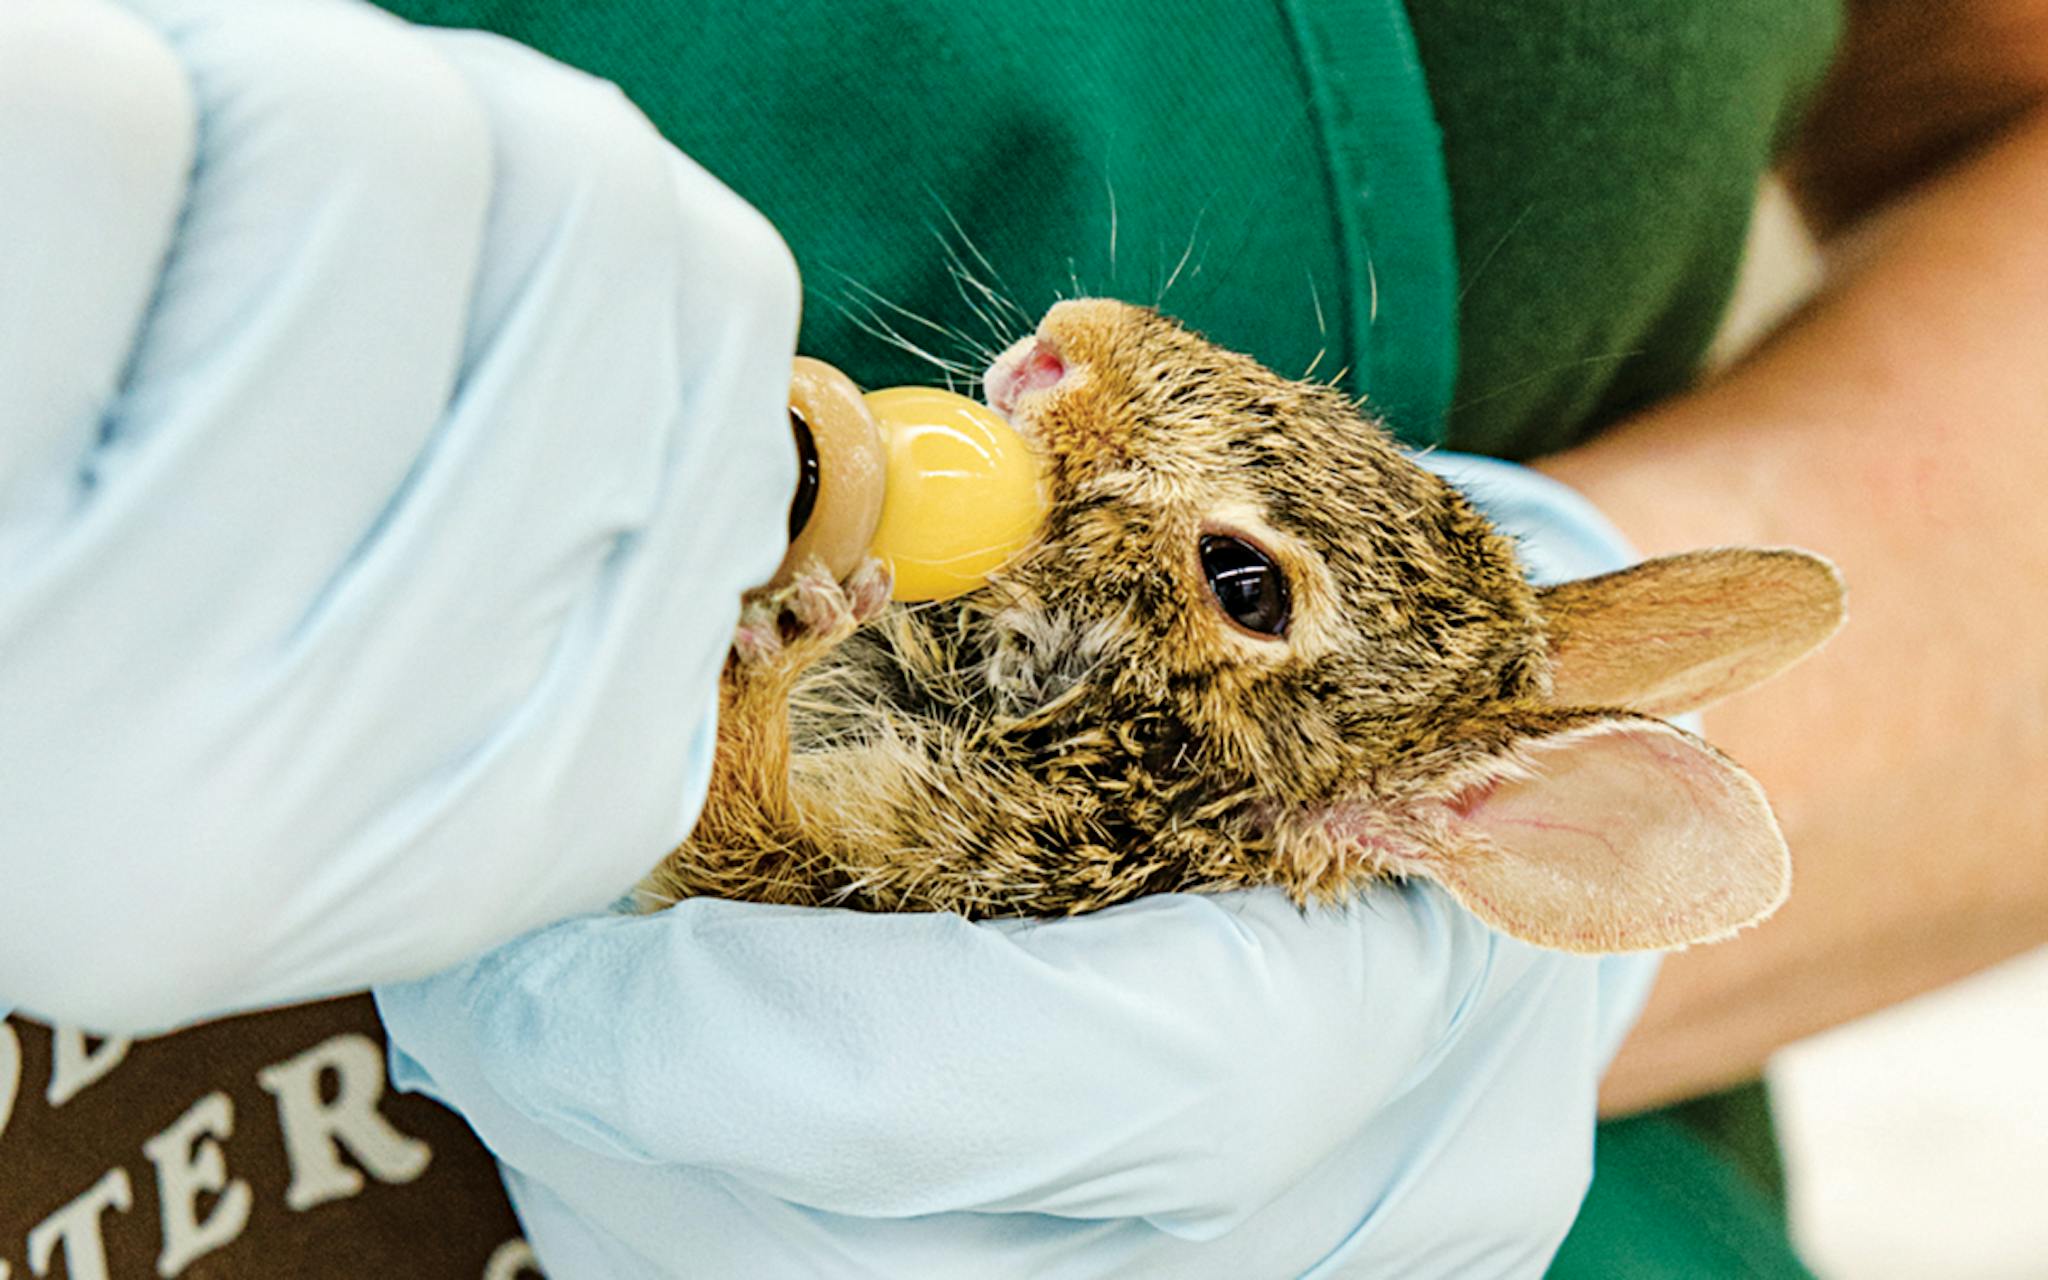 Baby bunny being bottle fed and cradled in hands donned with latex gloves.